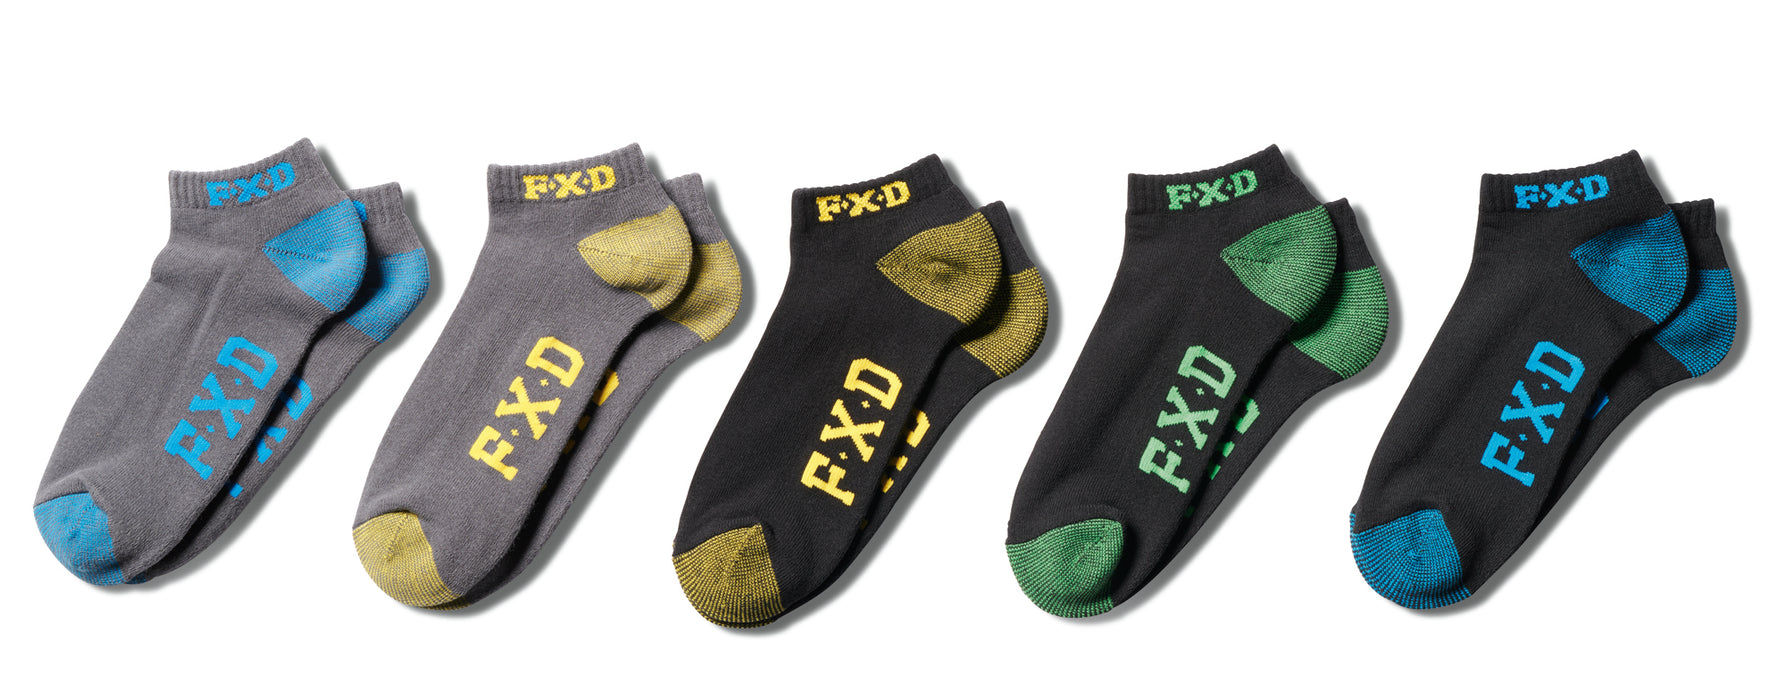 FXD Workwear SK-3 Assorted Ankle Socks 5 Pack at National Workwear Gold Coast Australia.